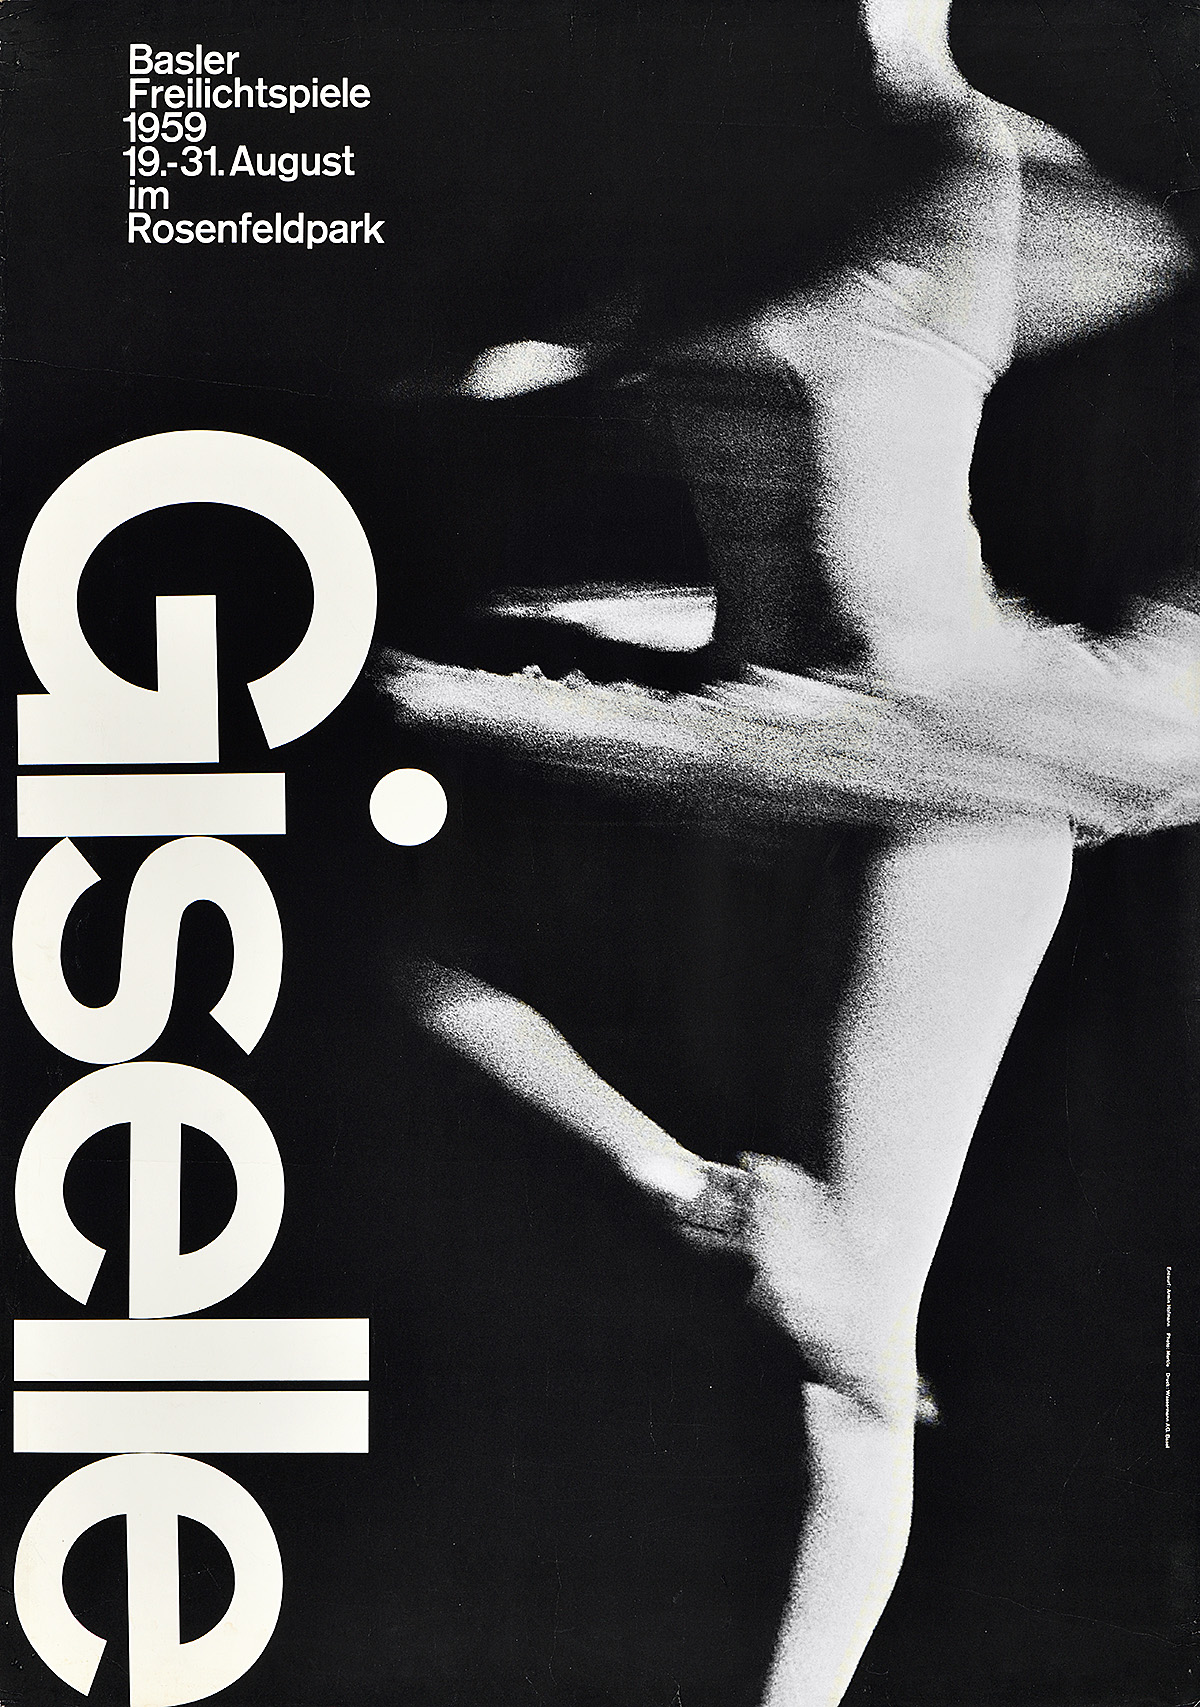 photographic poster of a ballerina in mid-pirouette, her bottom foot and head cut off. The word giselle runs down the left side of the poster